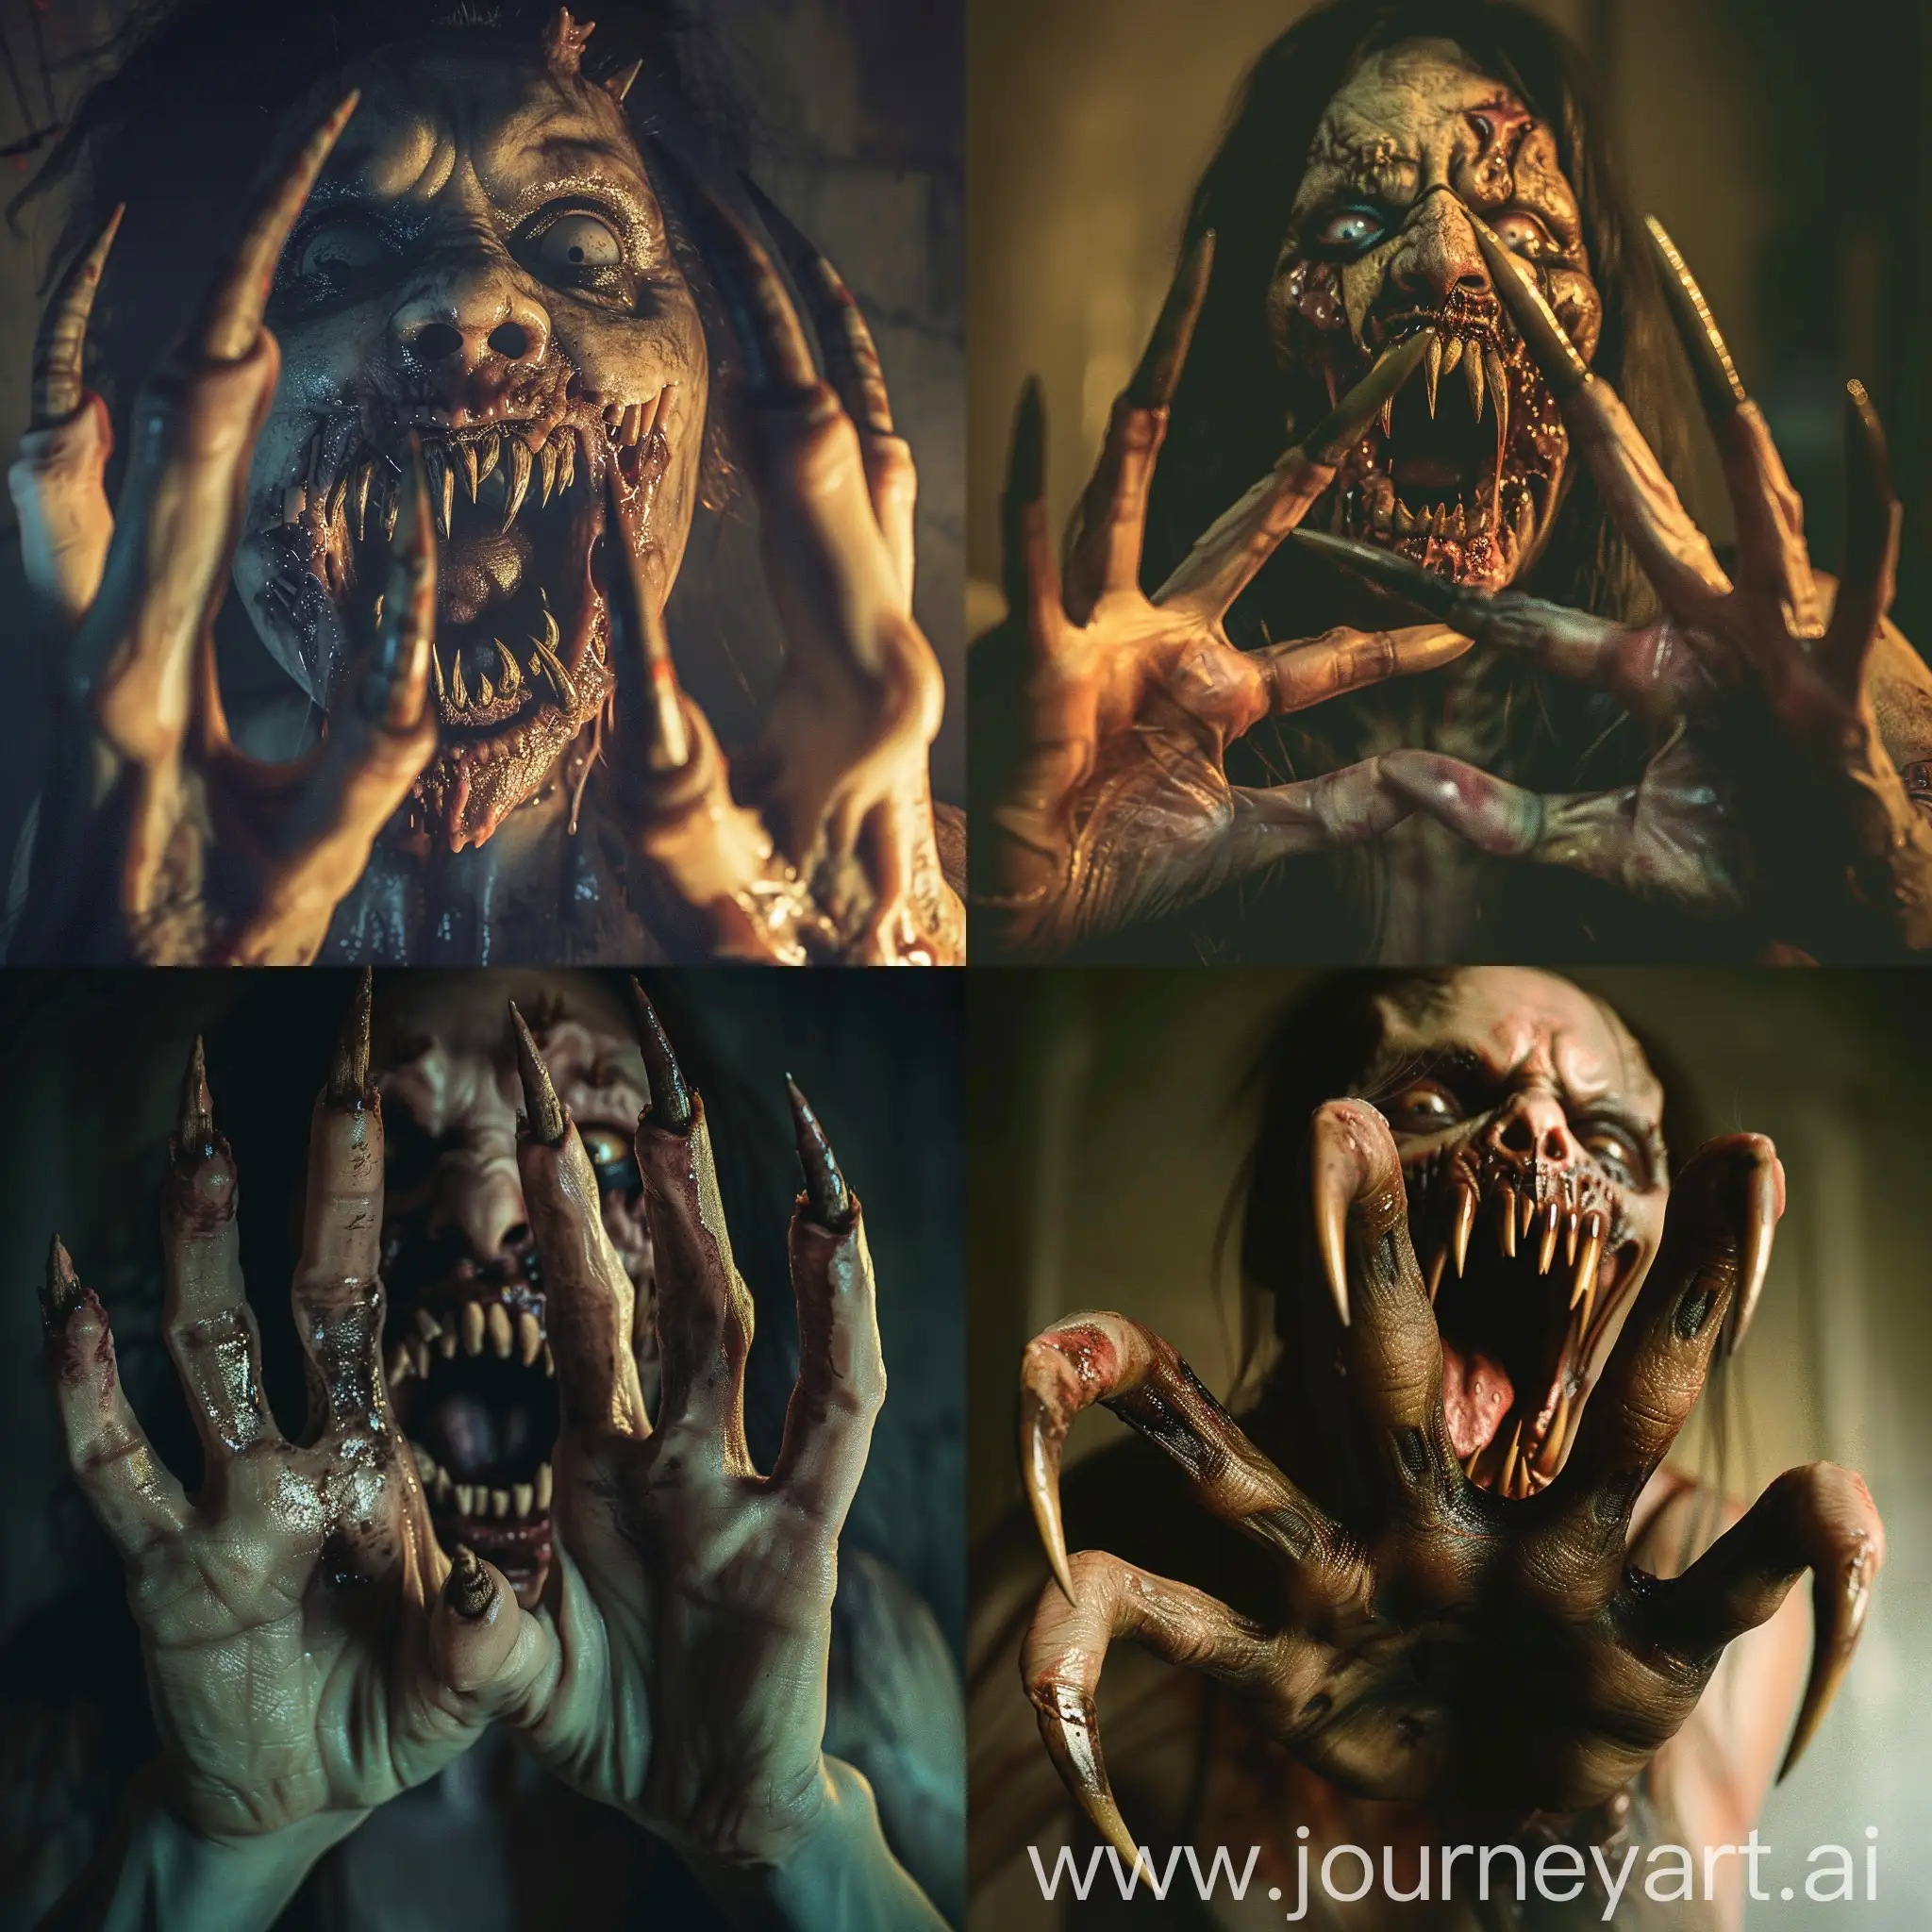 a photorealistic and horrifying nightmare scene of a zombie female with long pointed dirty nails protruding from each of the five detailed and realistic human fingers The zombie's menacingly open mouth reveals pointed teeth resembling fangs under atmospheric lighting in a full anatomical depiction, set in a night-time setting that is very clear without flaws.